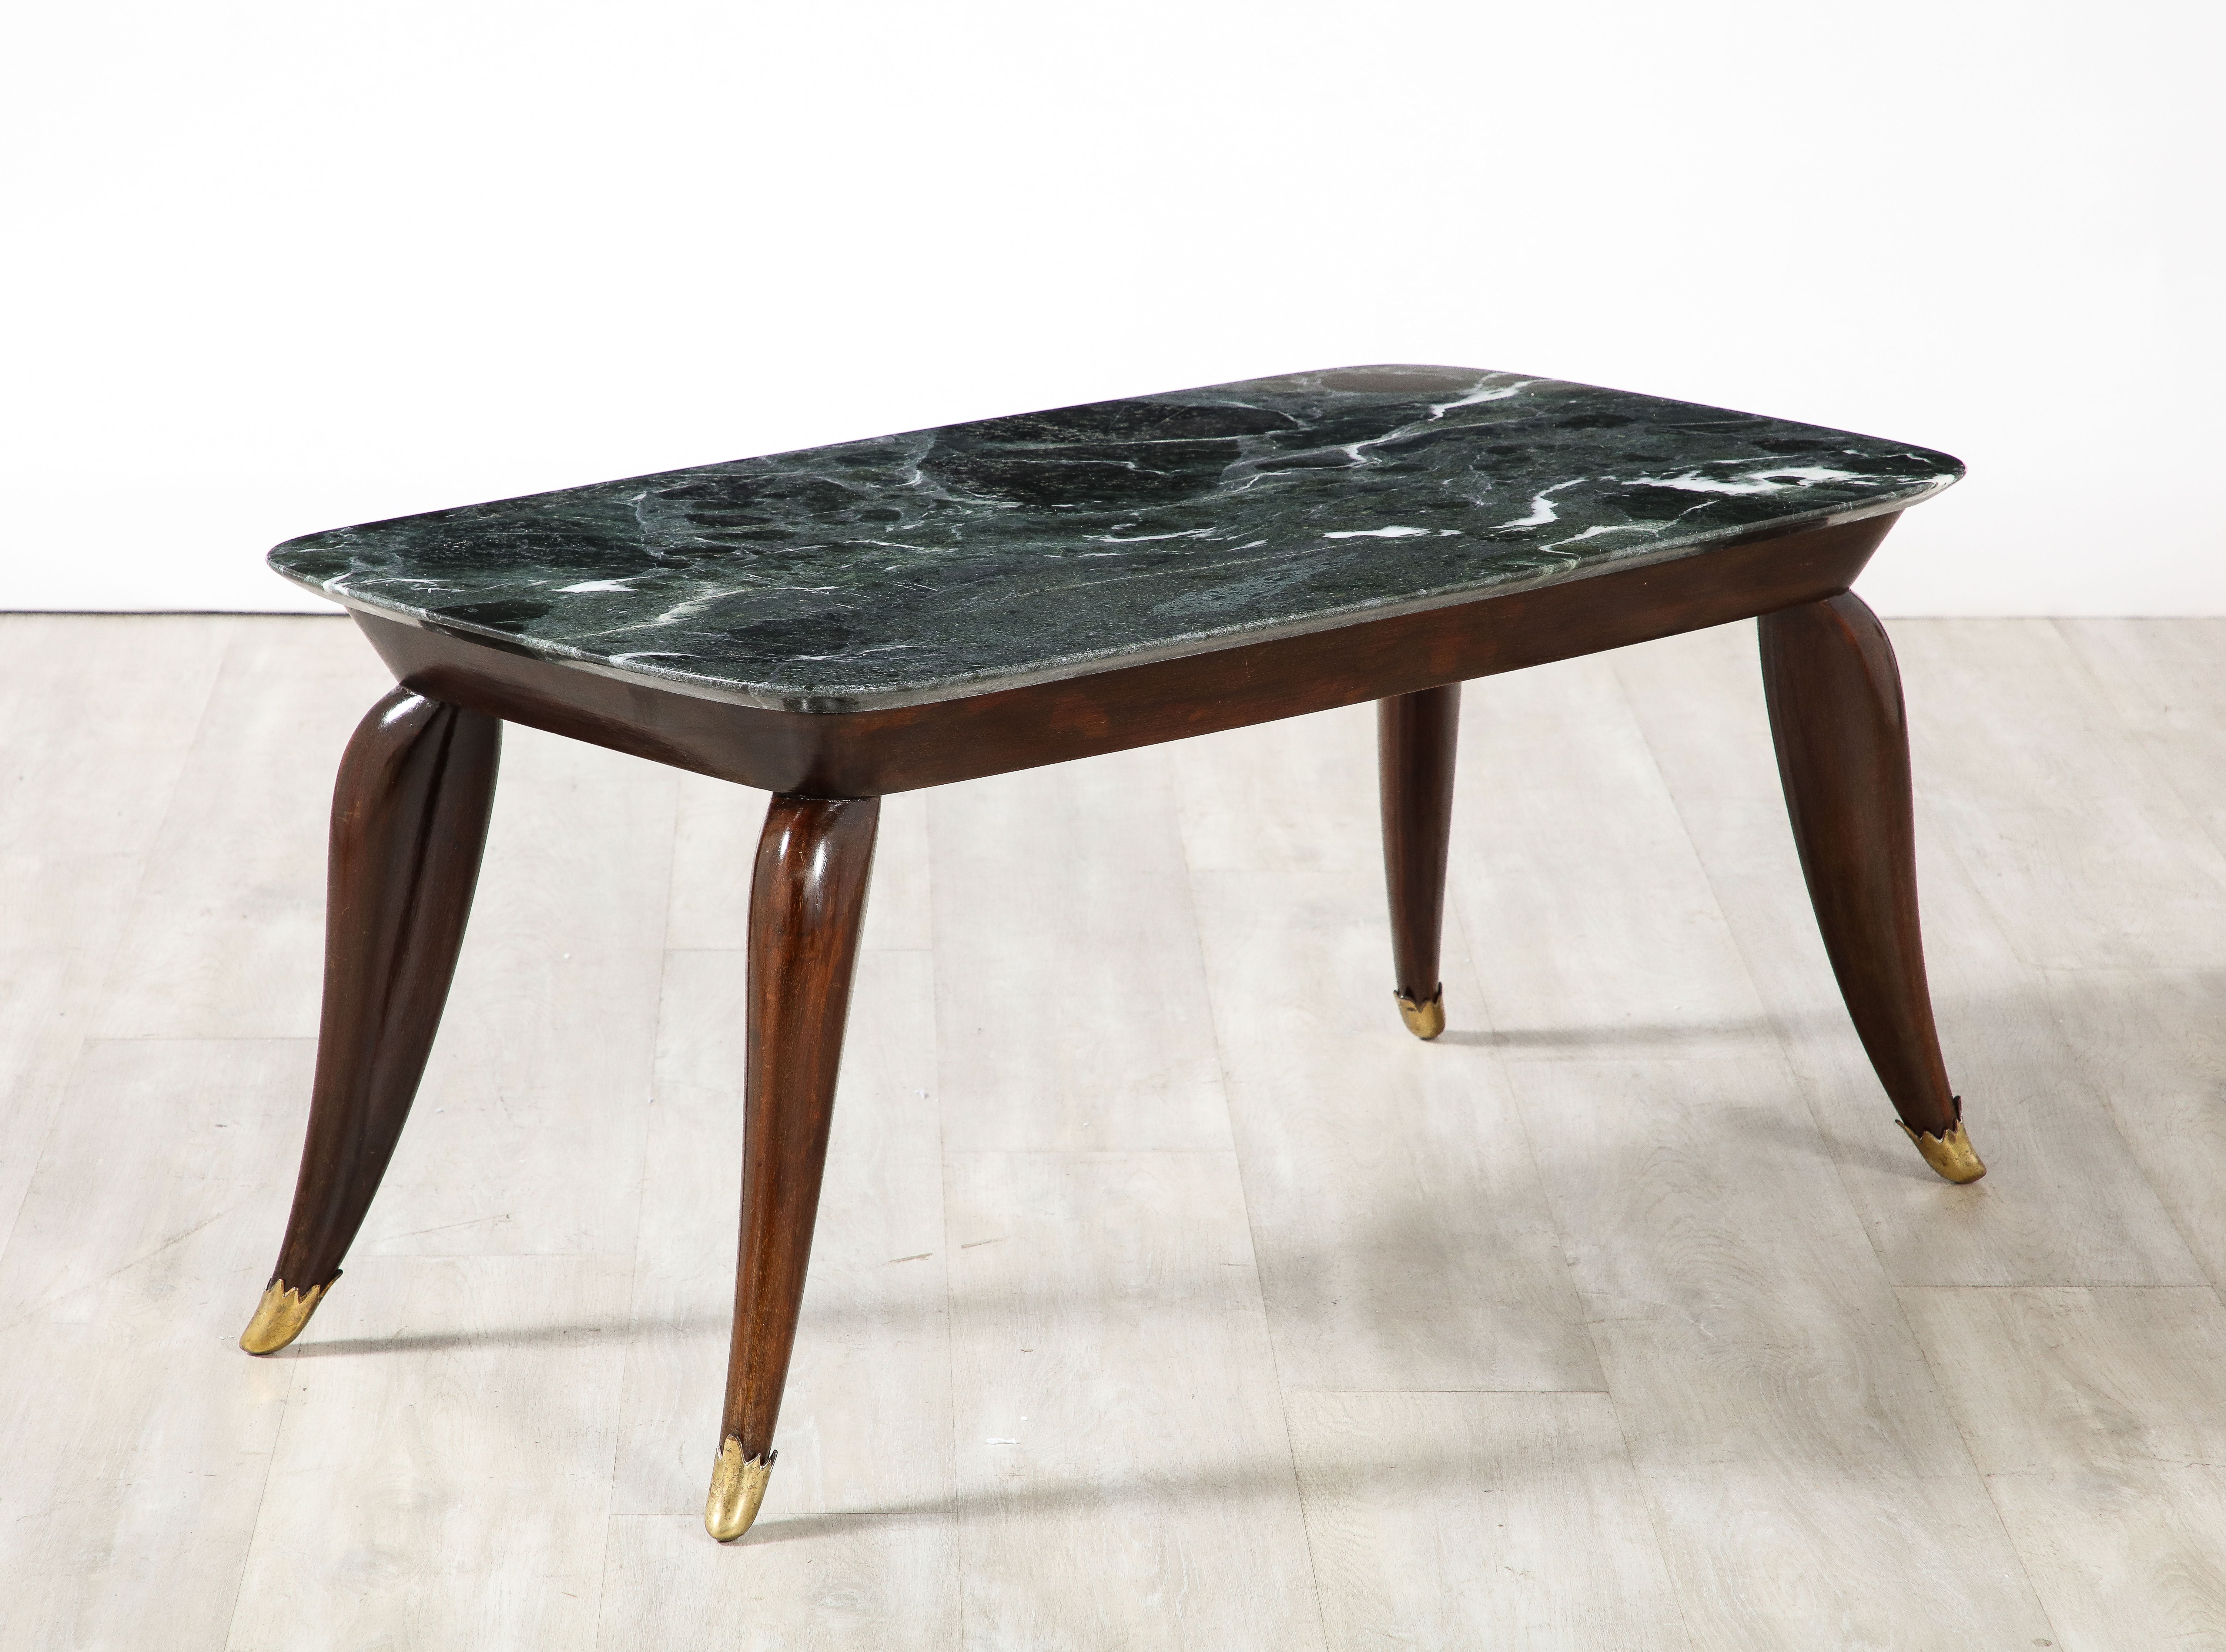 Italian Florentine walnut coffee table with Verdi Alpi marble top, circa 1940. The striking rectangular Verdi Alpi marble sits atop a wide walnut apron surround supported on elegantly splayed legs ending in fanciful brass sabot. The walnut is rich